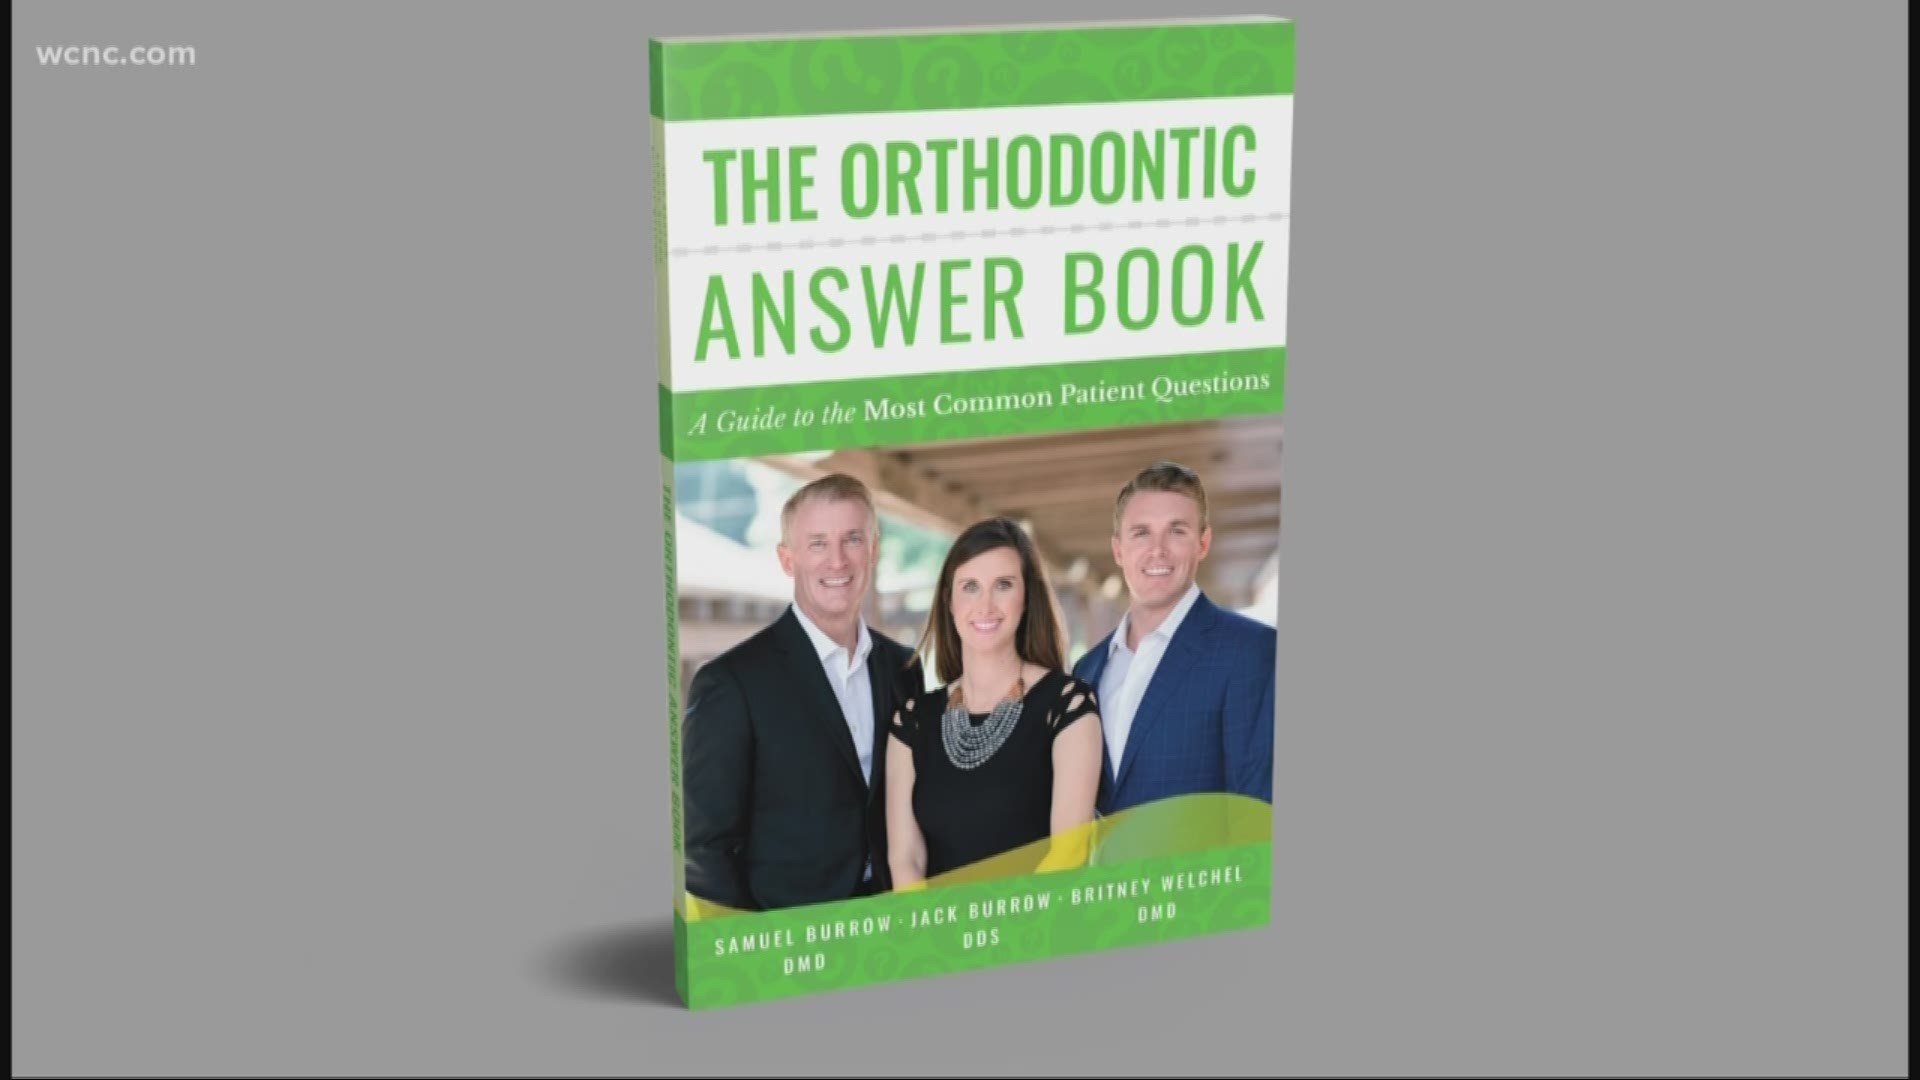 Dr.  Sam Burrow from Burrow and Welchel Orthodontics answers commonly asked questions